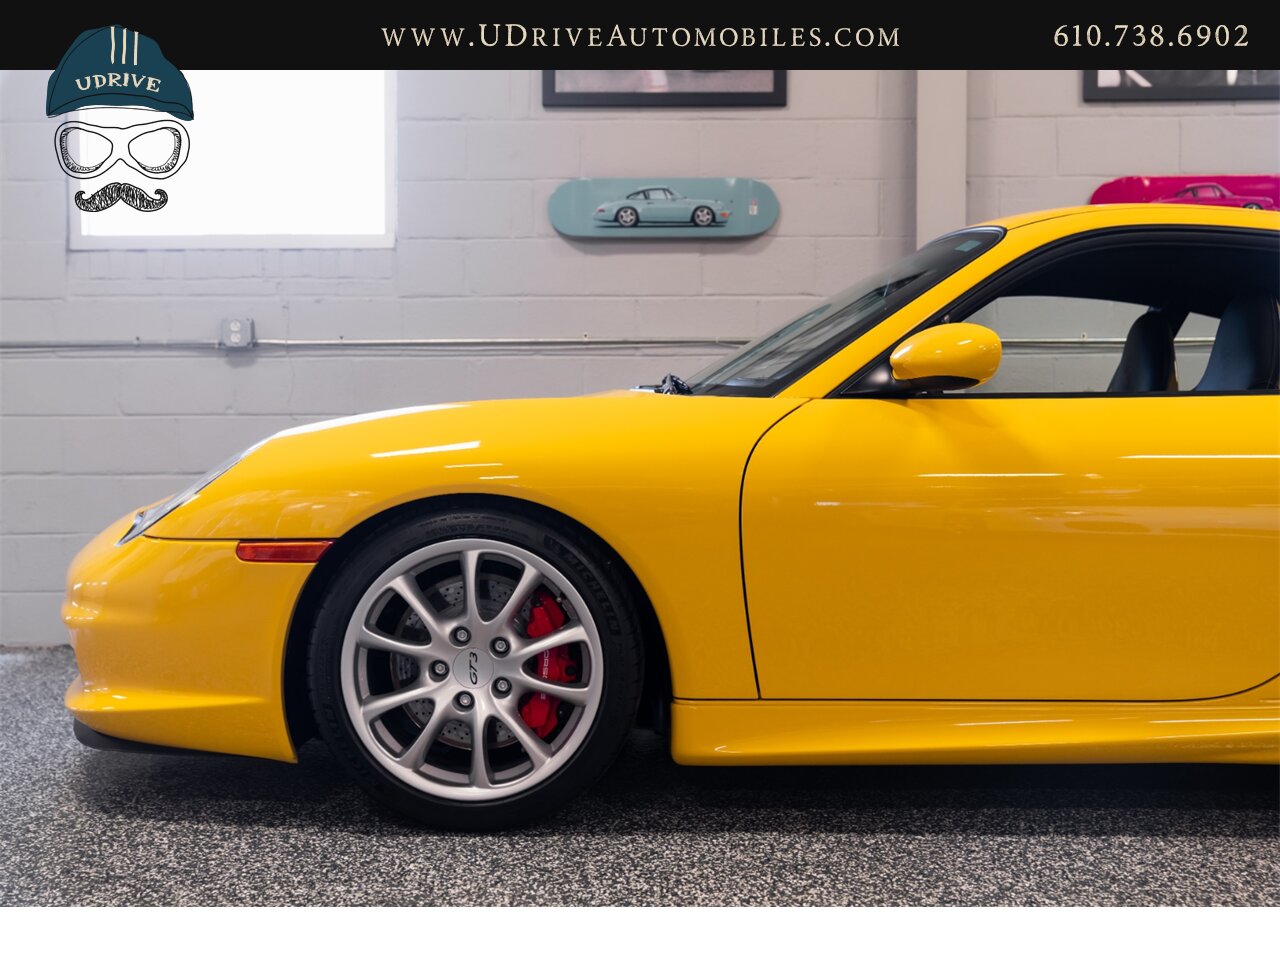 2005 Porsche 911 GT3 996 Speed Yellow Sport Seats Pntd Hardbacks  Pntd Console Deviating Stitch Yellow Accents Throughout - Photo 9 - West Chester, PA 19382